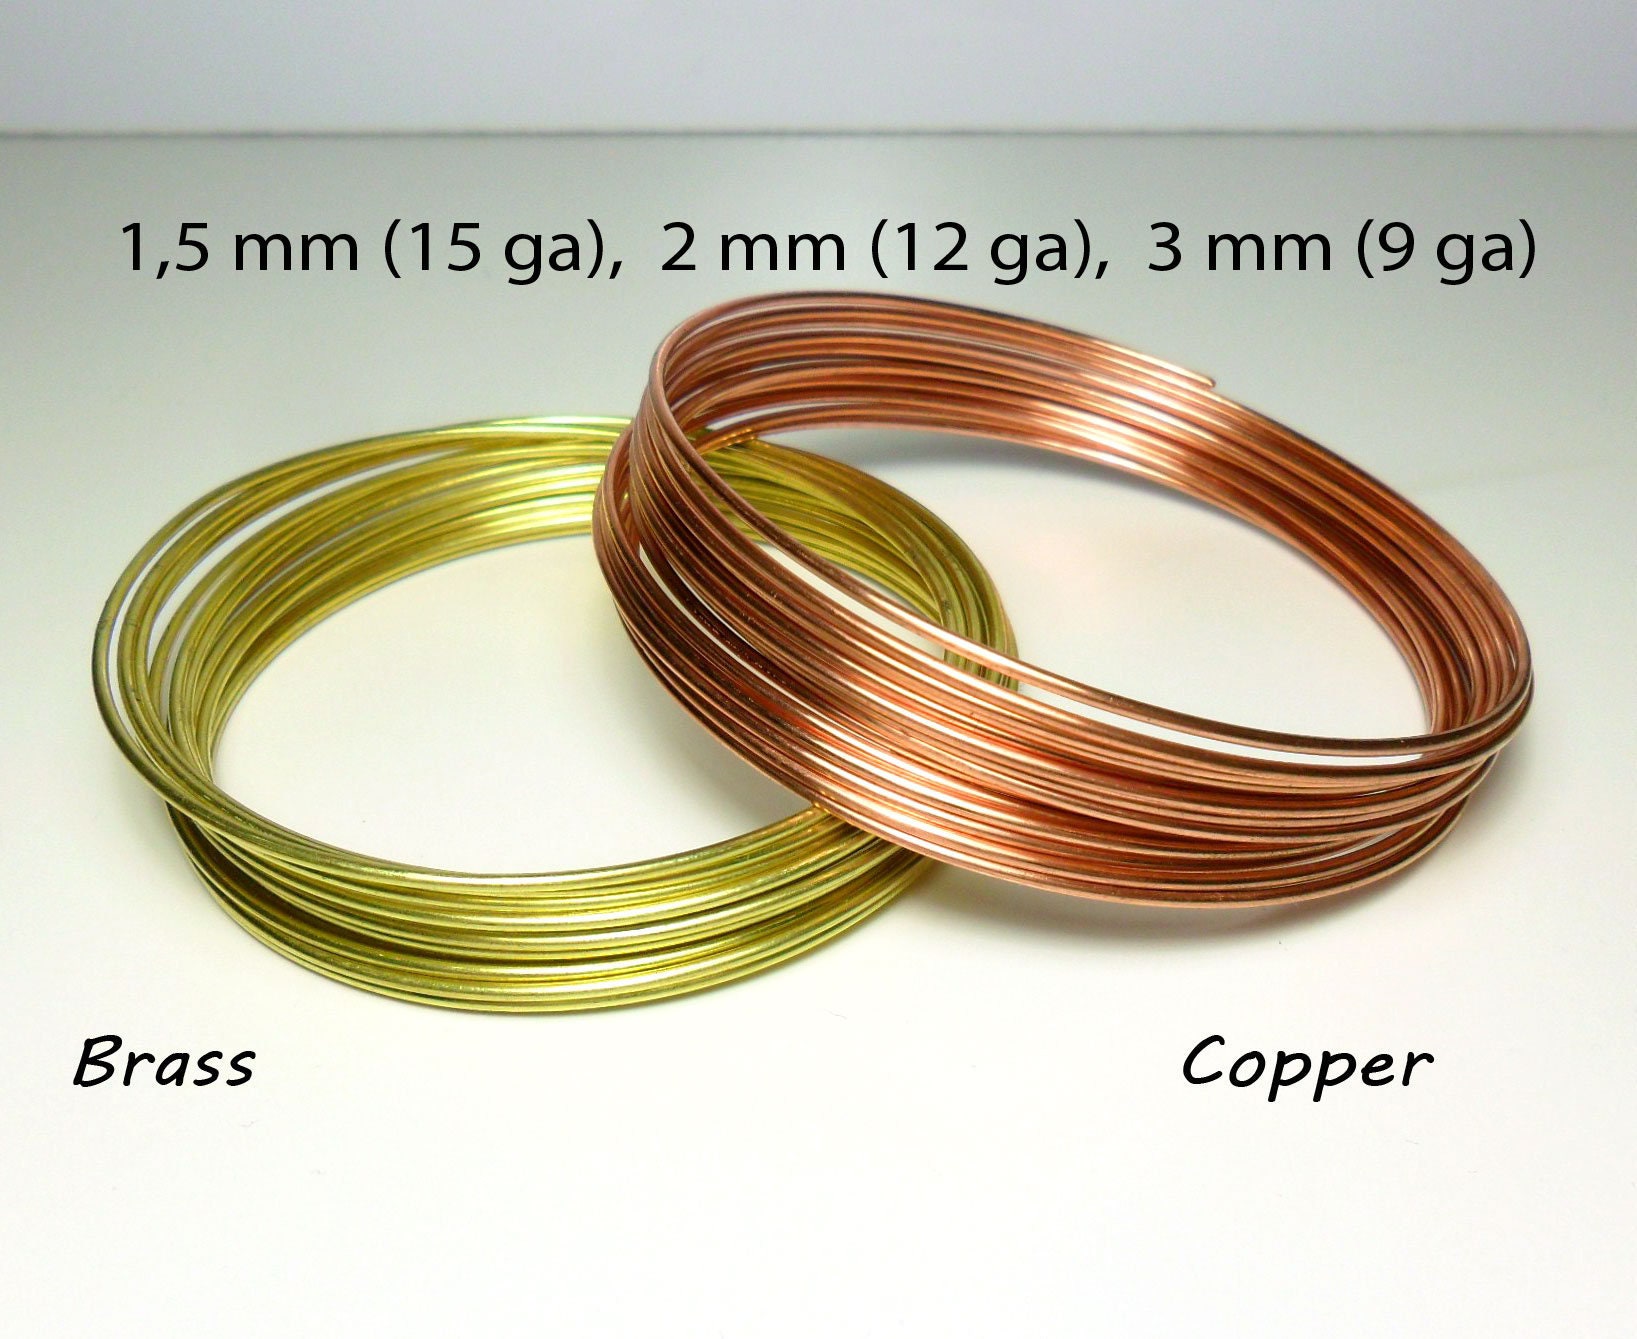 Silver Plated Wire, Flat Wire, Copper Tape, Silver Flat Wire, 1 Metre Wire  Tape, 3mm X 0.75mm Wire, Jewelry Wire, Wire Wrapping, UK Seller 